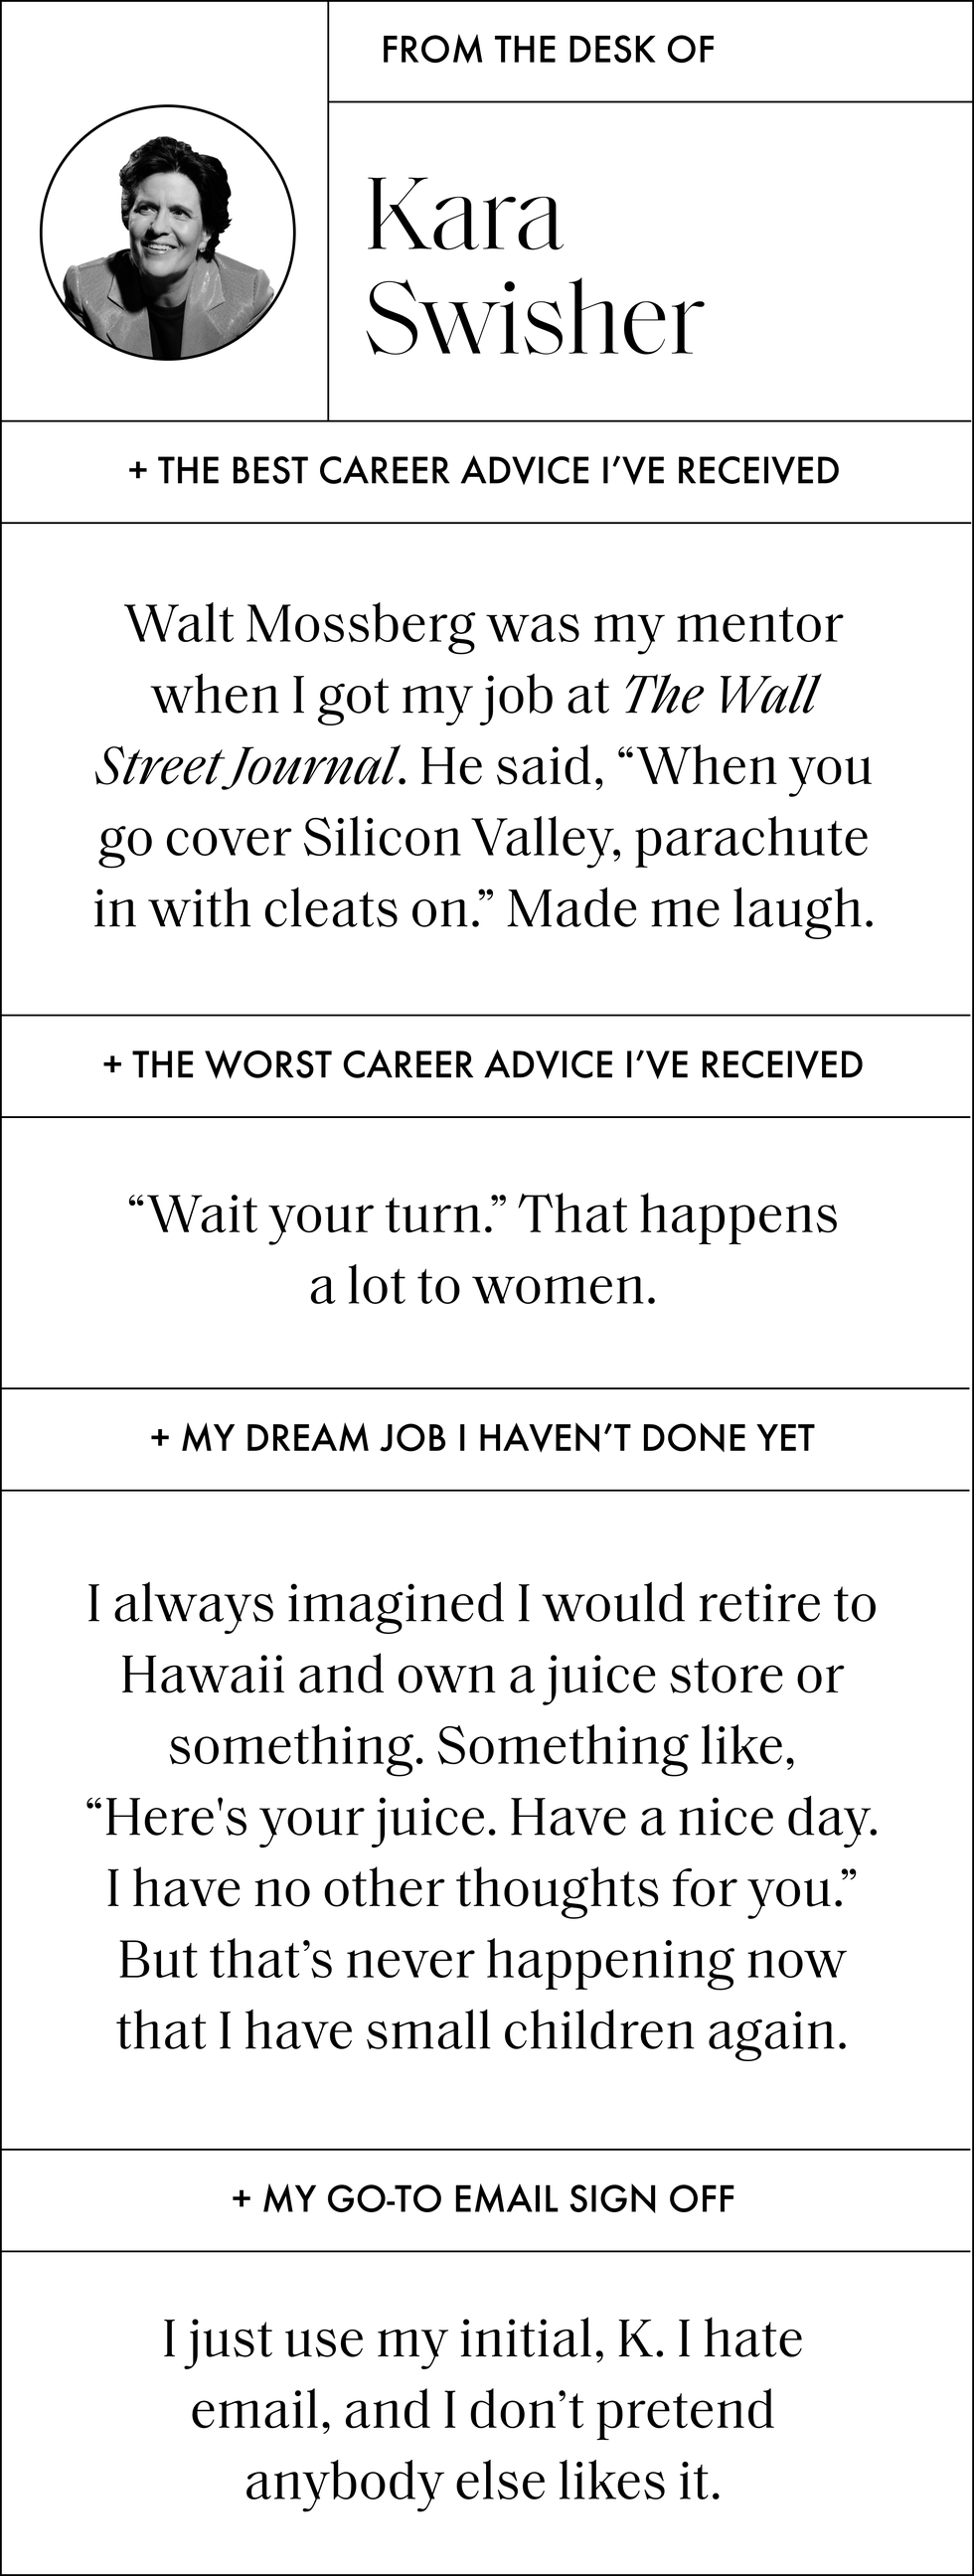 a question and answer with kara swisher that reads the best career advice i've received walt mossberg was my mentor when i got my job at the wall street journal he said, when you go cover silicon valley, parachute in with cleats on made me laugh the worst career advice i've received wait your turn that happens a lot to women my dream job i haven't done yet i always imagined i would retire to hawaii and own a juice store or something something like, here's your juice have a nice day i have no other thoughts for you but that’s never happening now that i have small children again my go to email sign off i just use my initial, k i hate email, and i don’t pretend anybody else likes it